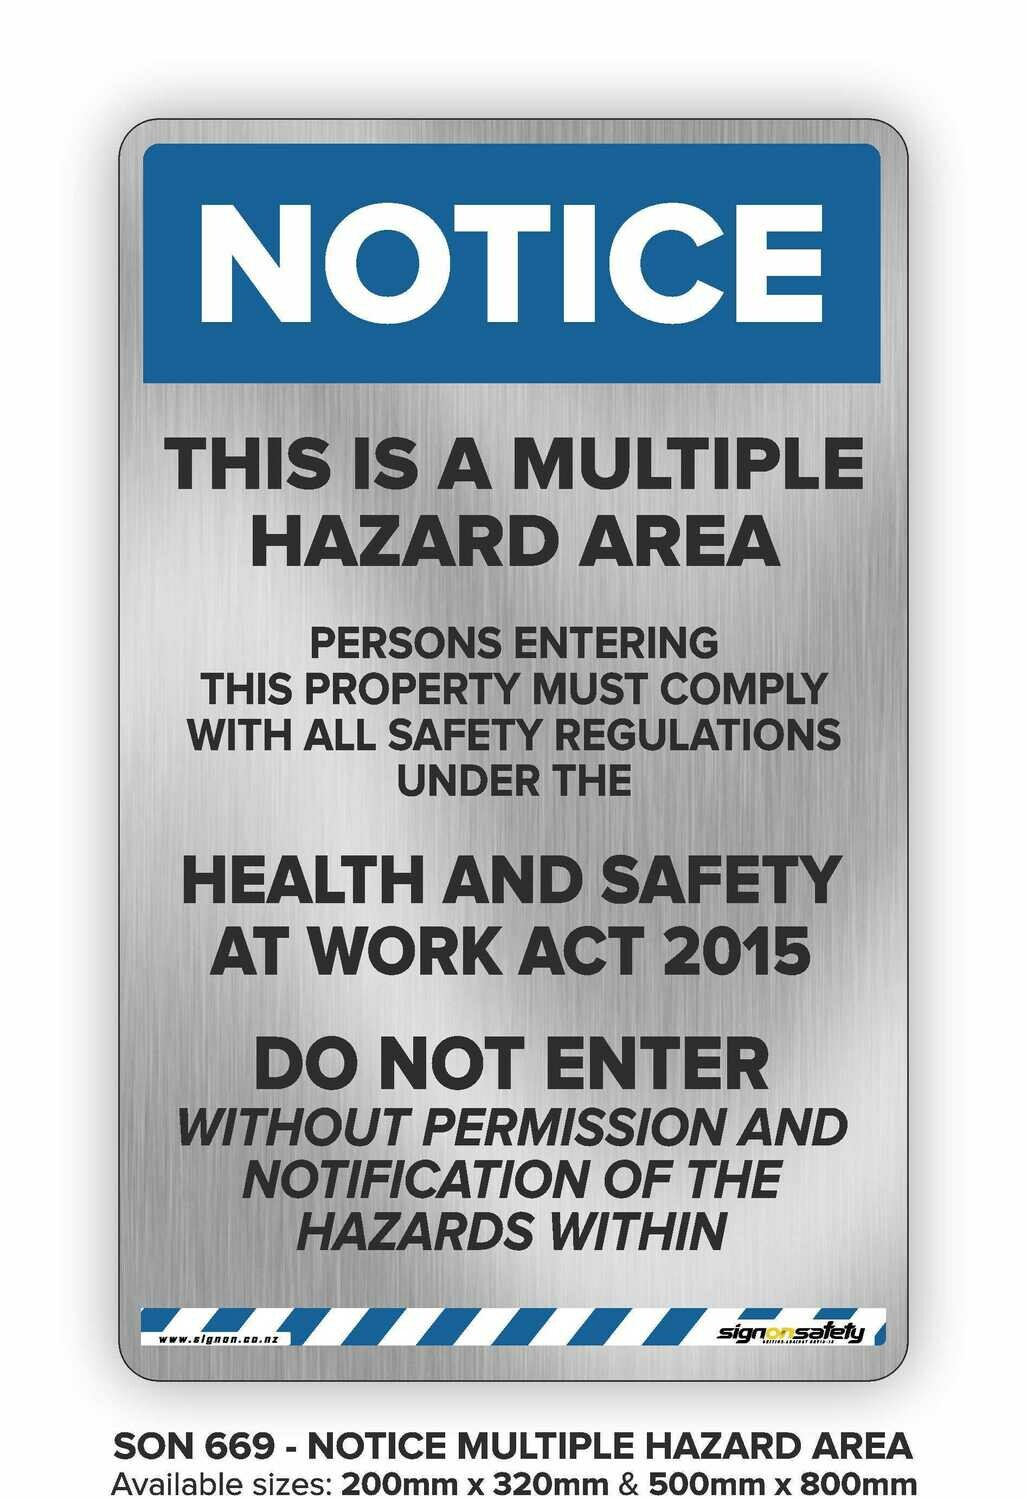 Notice - This Is A Multiple Hazard Area